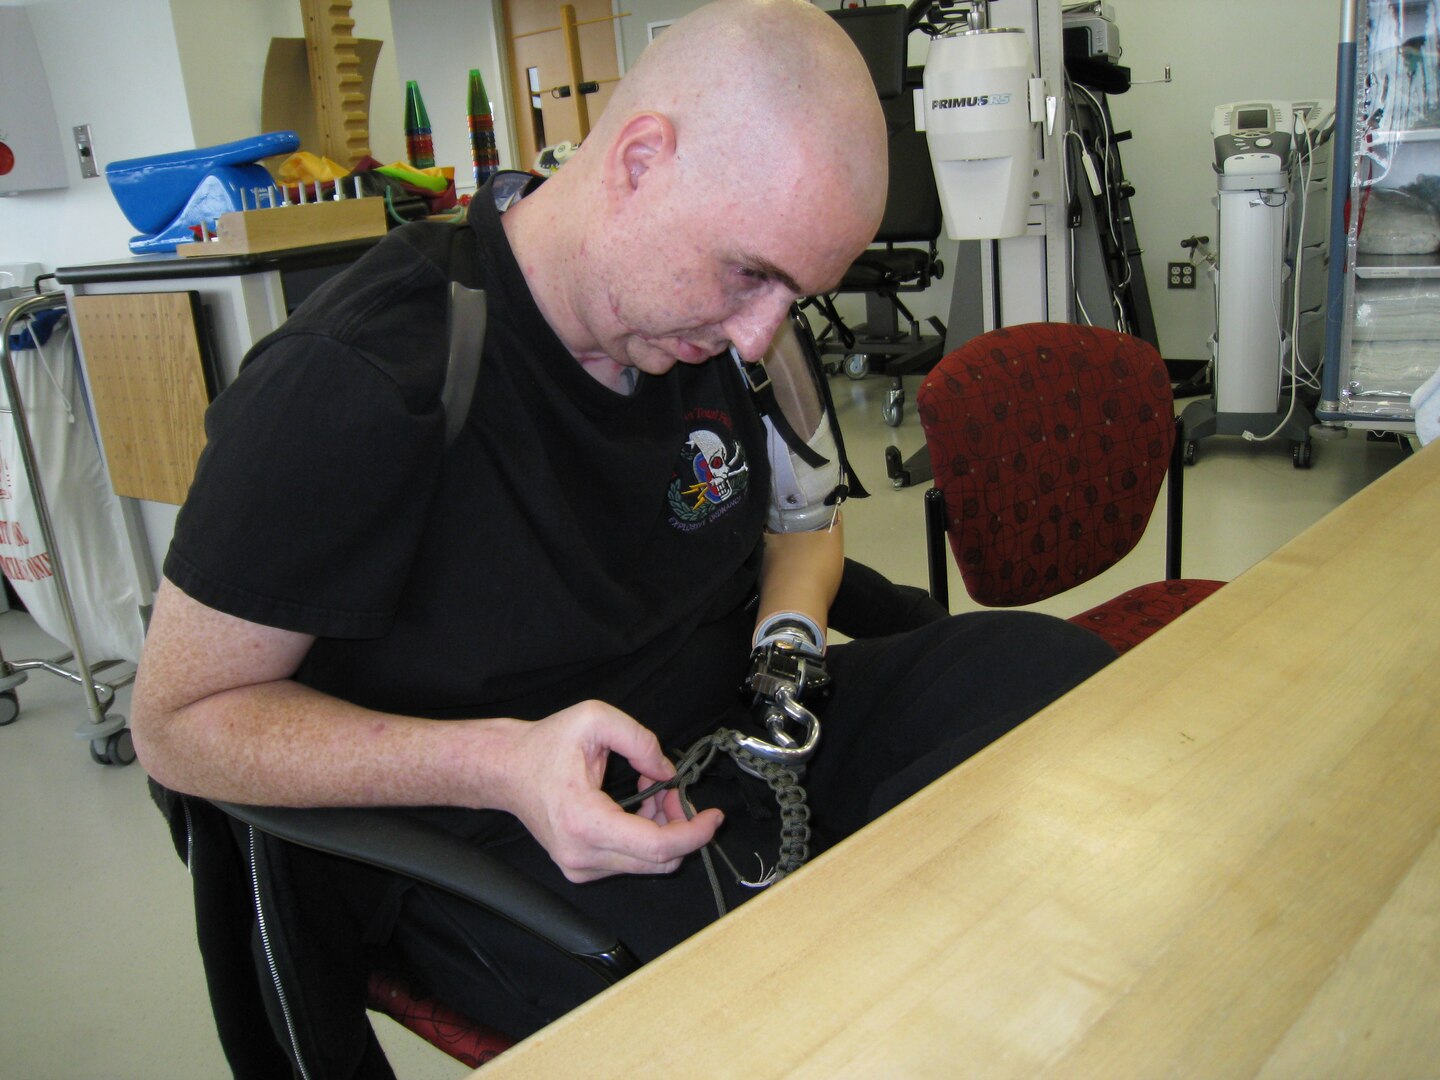 Staff Sgt. Matthew Slaydon works to tie a know with his prosthetic arm during rehabilitation at Brooke Army Medical Center. (Courtesy photo)